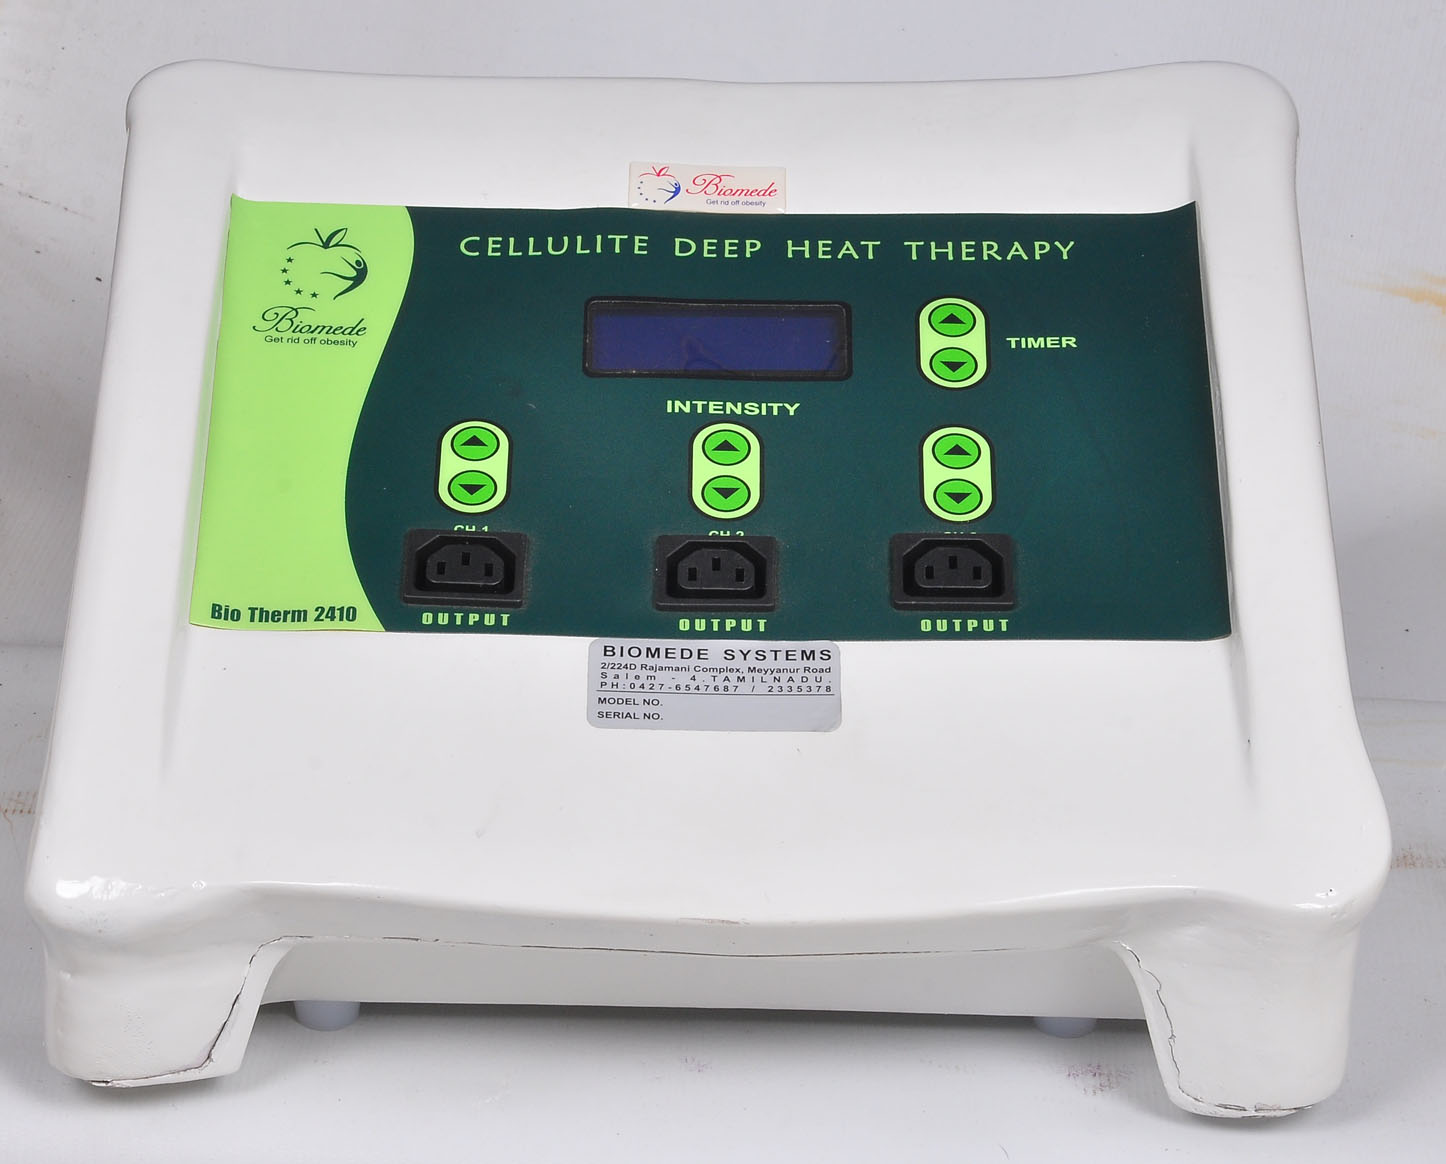 Cellulite Deep Heat Therapy